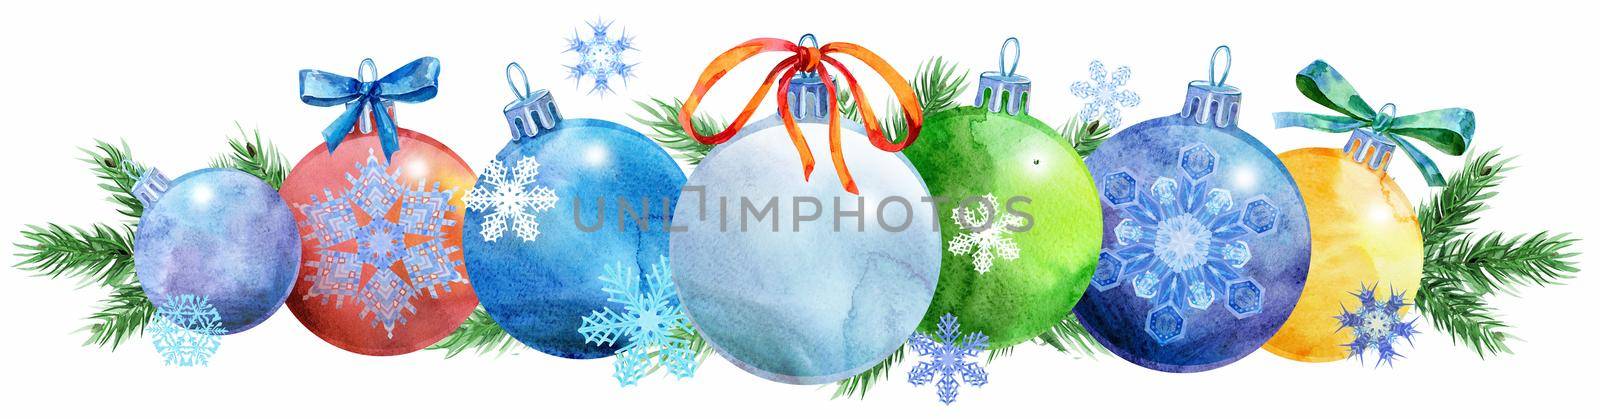 Watercolor Christmas tree border for your creativity by NataOmsk